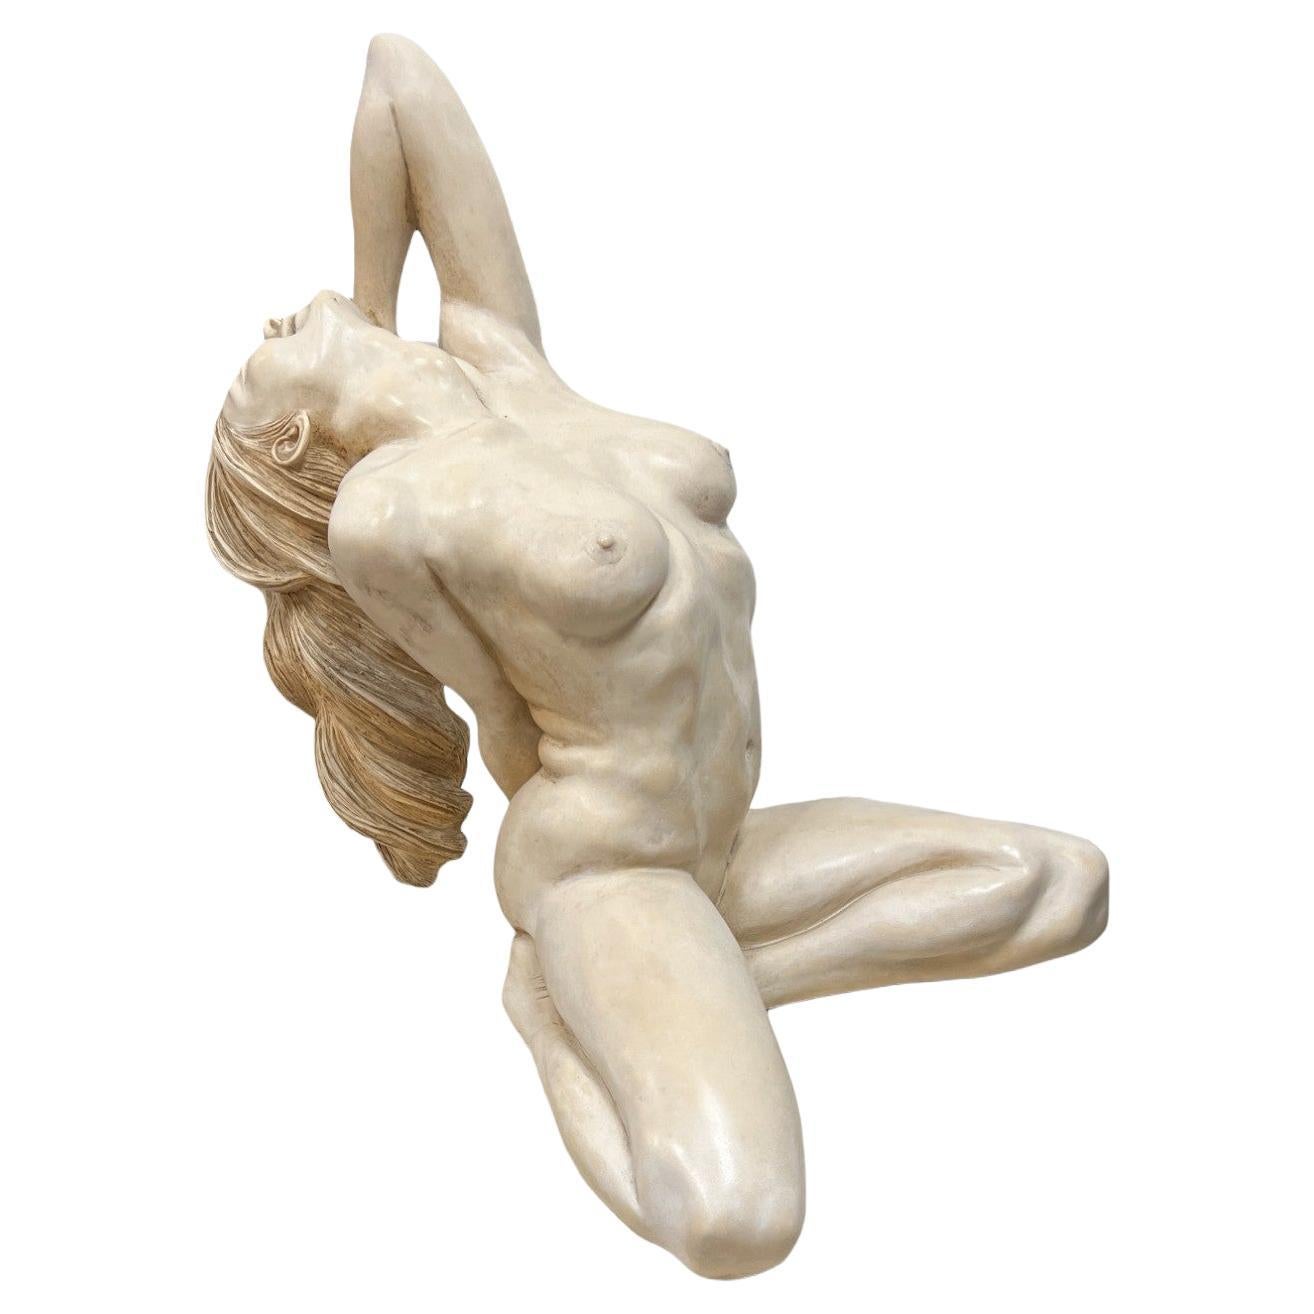 Seated Reclining Nude Female Sculpture For Sale